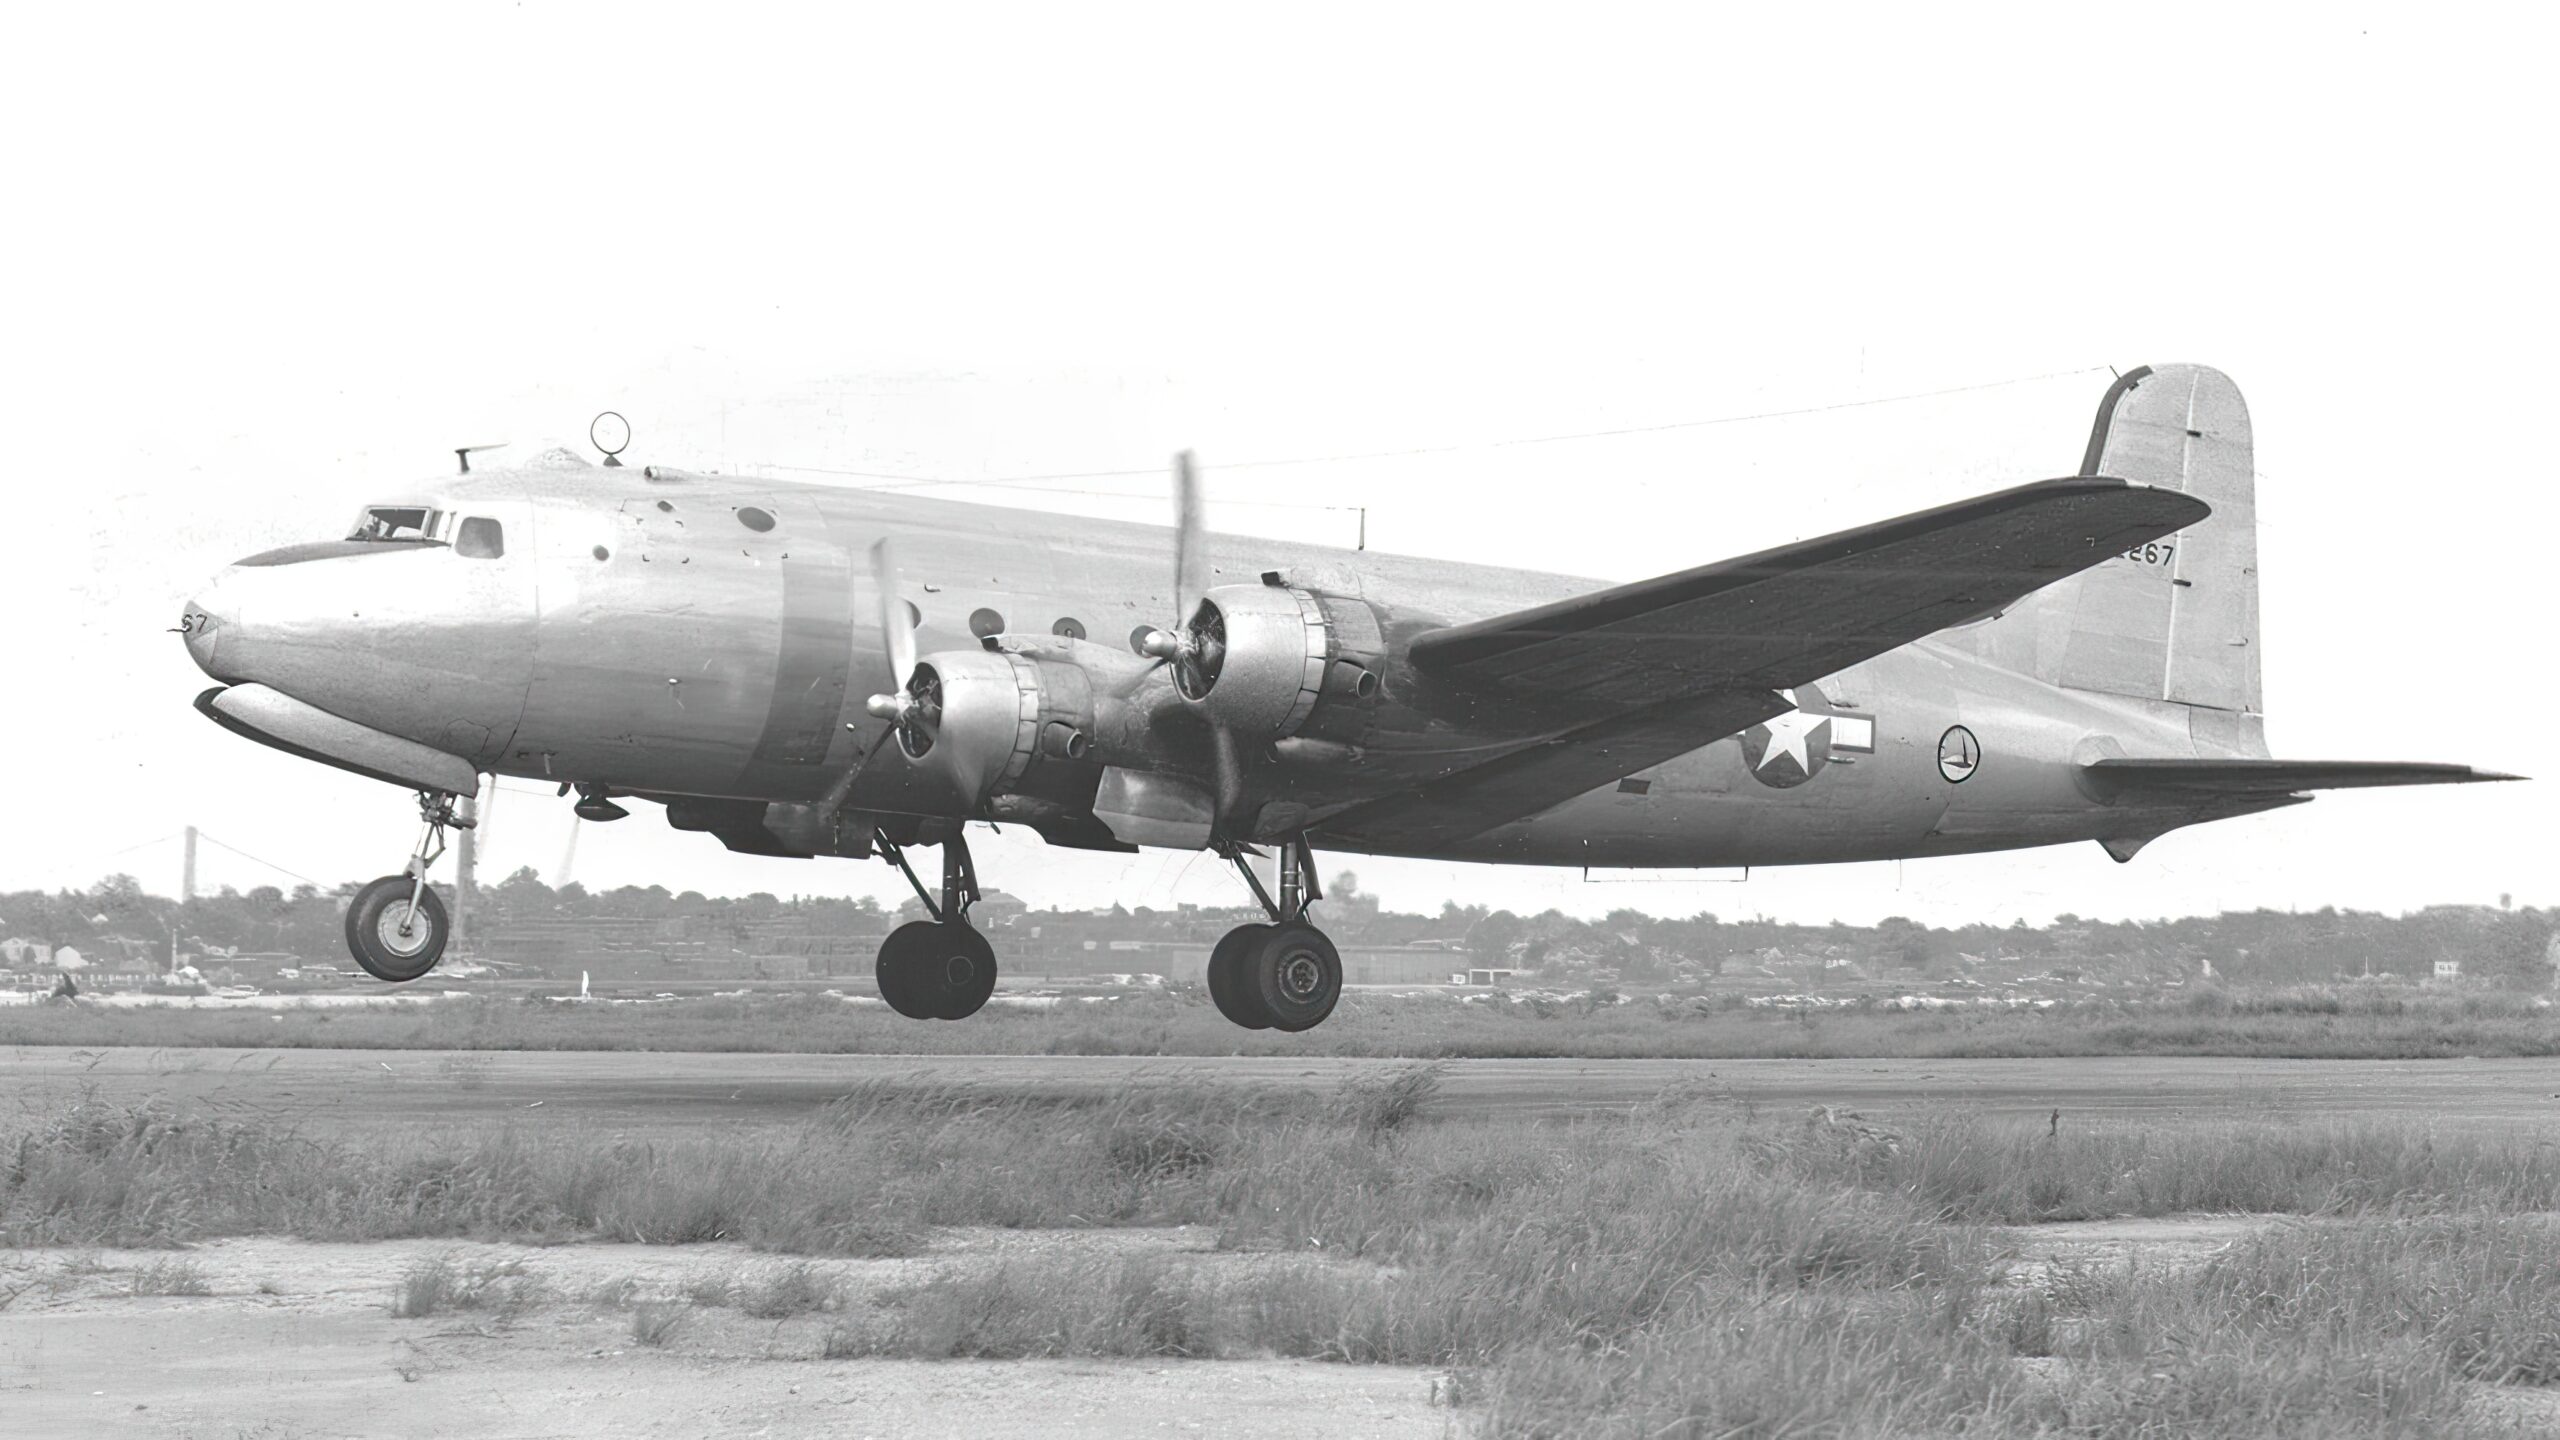 Taking off at LaGuardia Field, NY, on August 4, 1945.The Air Transport Command insignia is on rear of fuselage